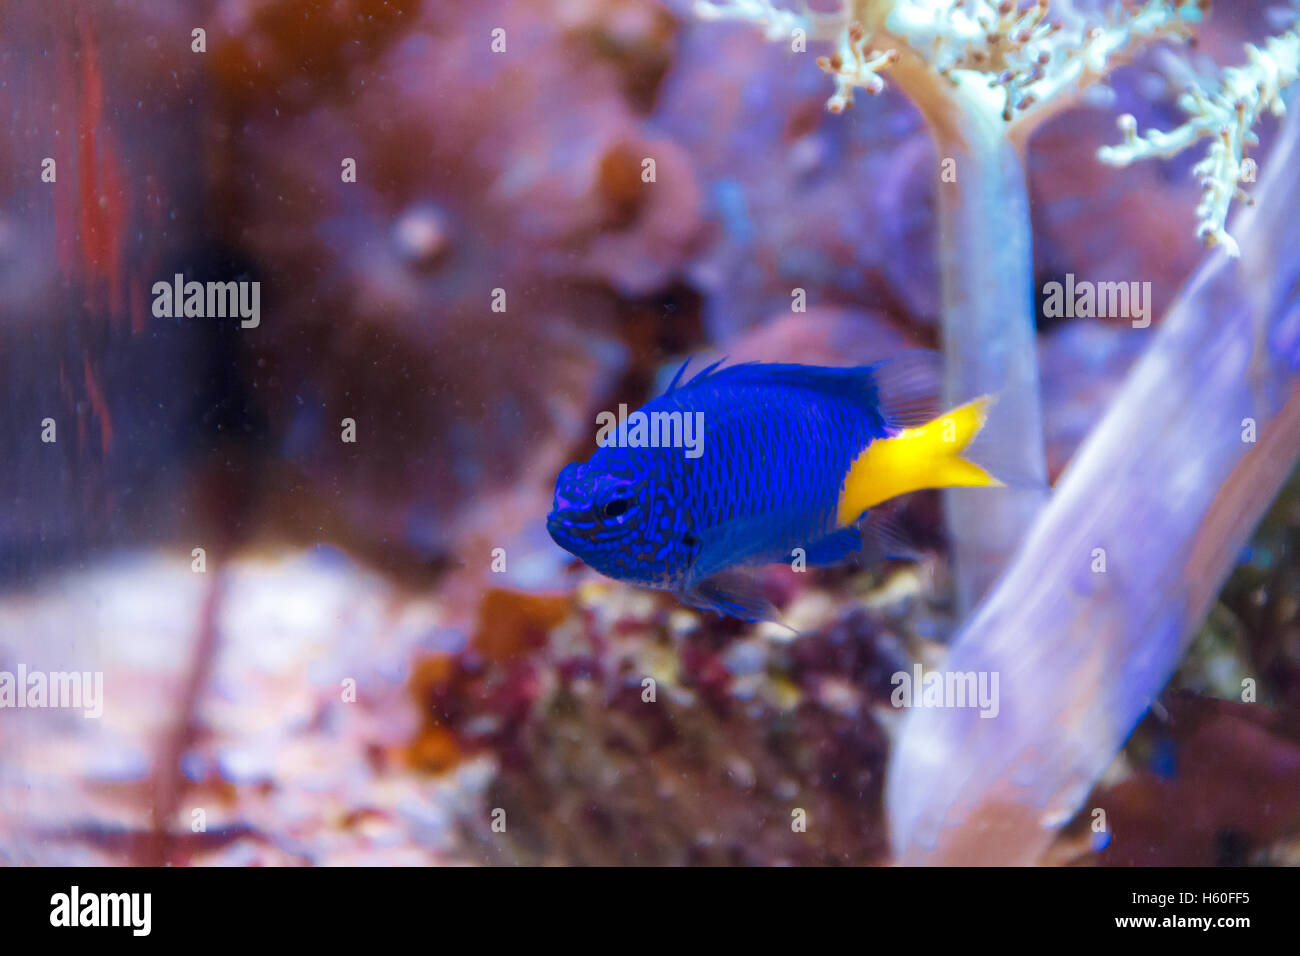 One blue fish chrysiptera parasema with yellow tail swimming in aquarium Stock Photo